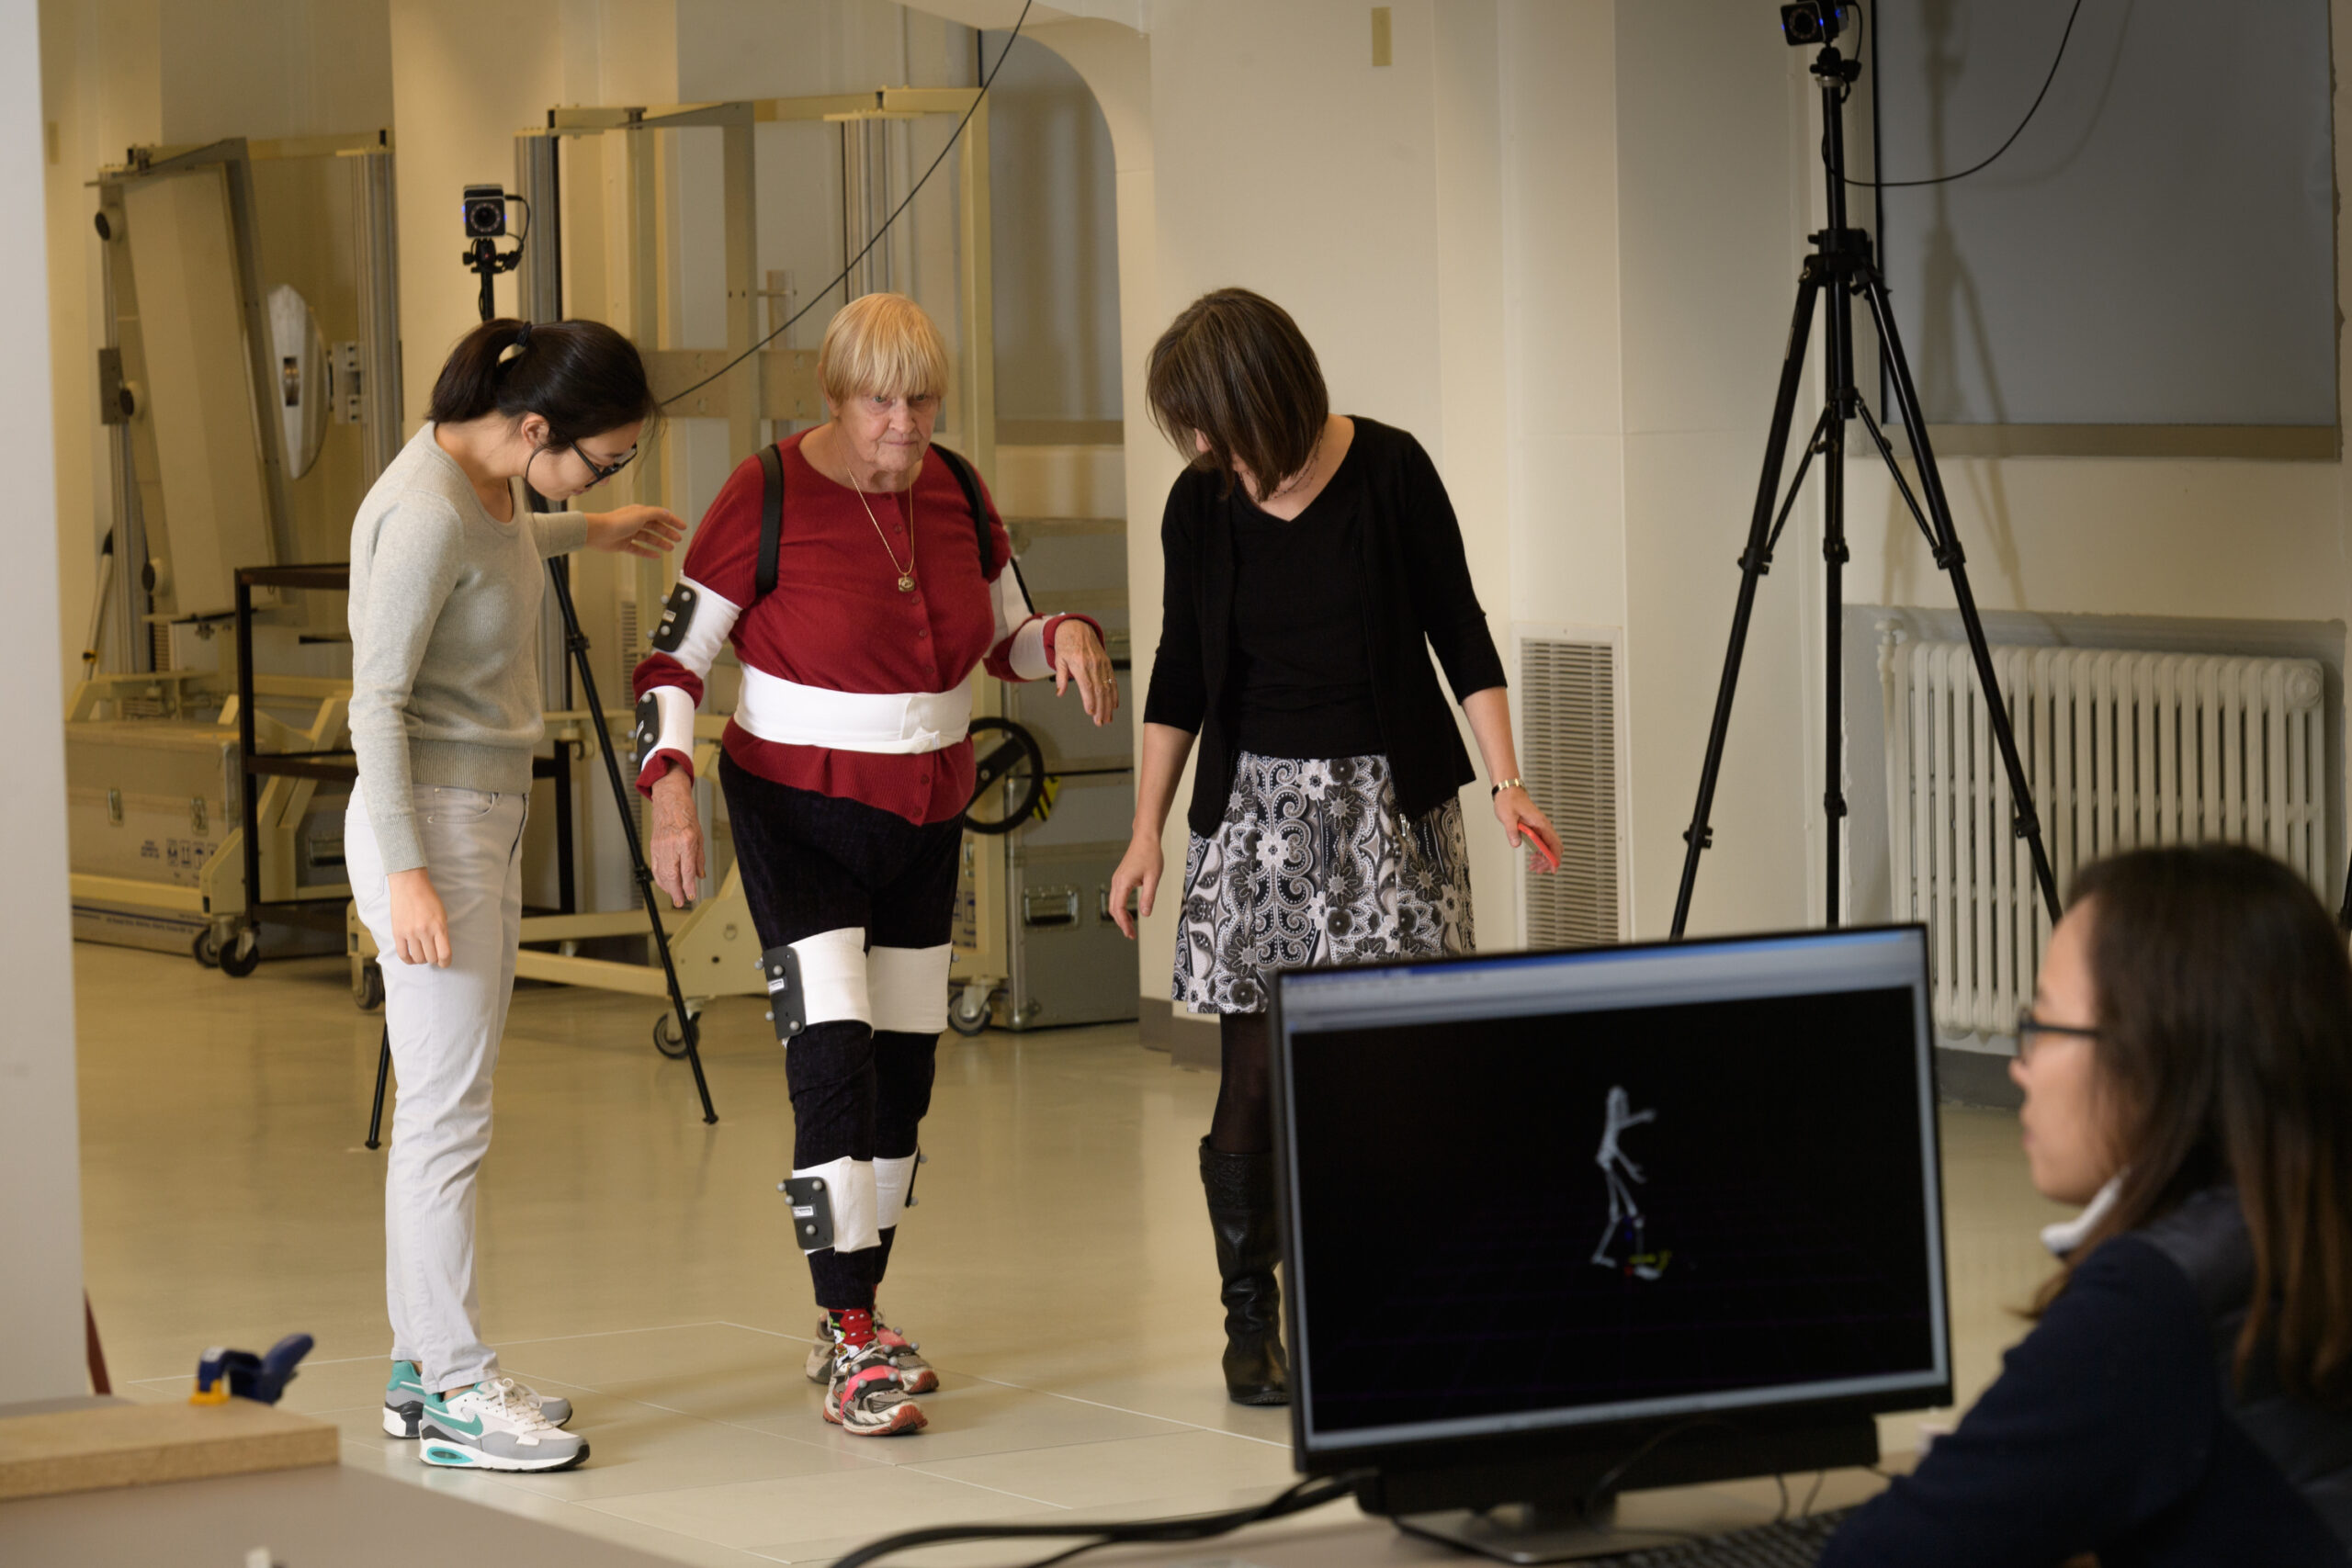 A research participant walks with the help of Purdue health and kinesiology researchers.